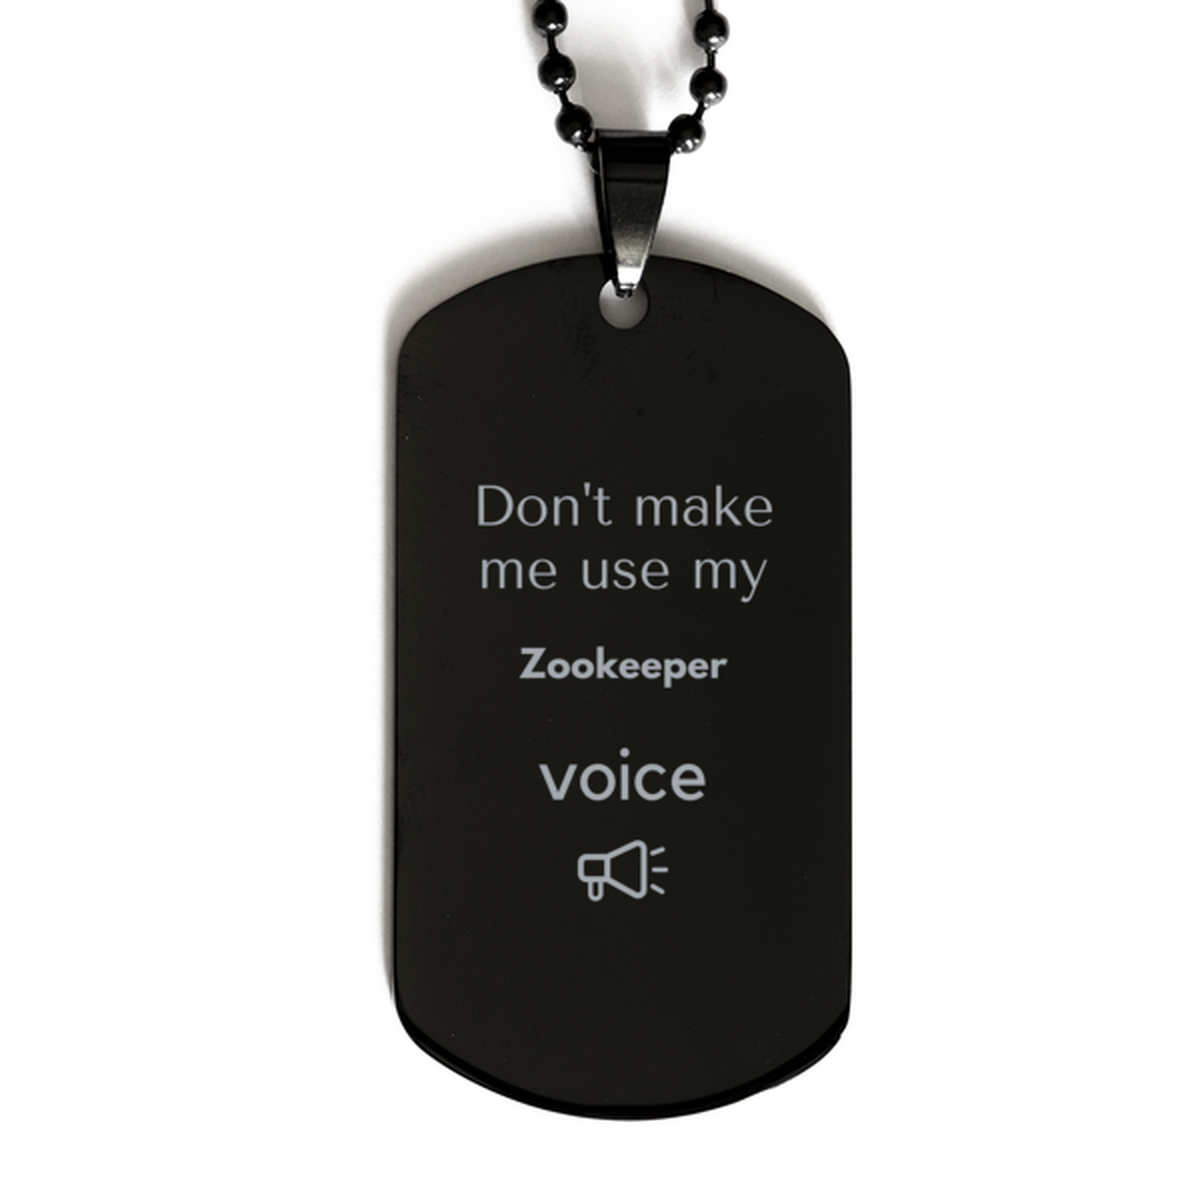 Don't make me use my Zookeeper voice, Sarcasm Zookeeper Gifts, Christmas Zookeeper Black Dog Tag Birthday Unique Gifts For Zookeeper Coworkers, Men, Women, Colleague, Friends